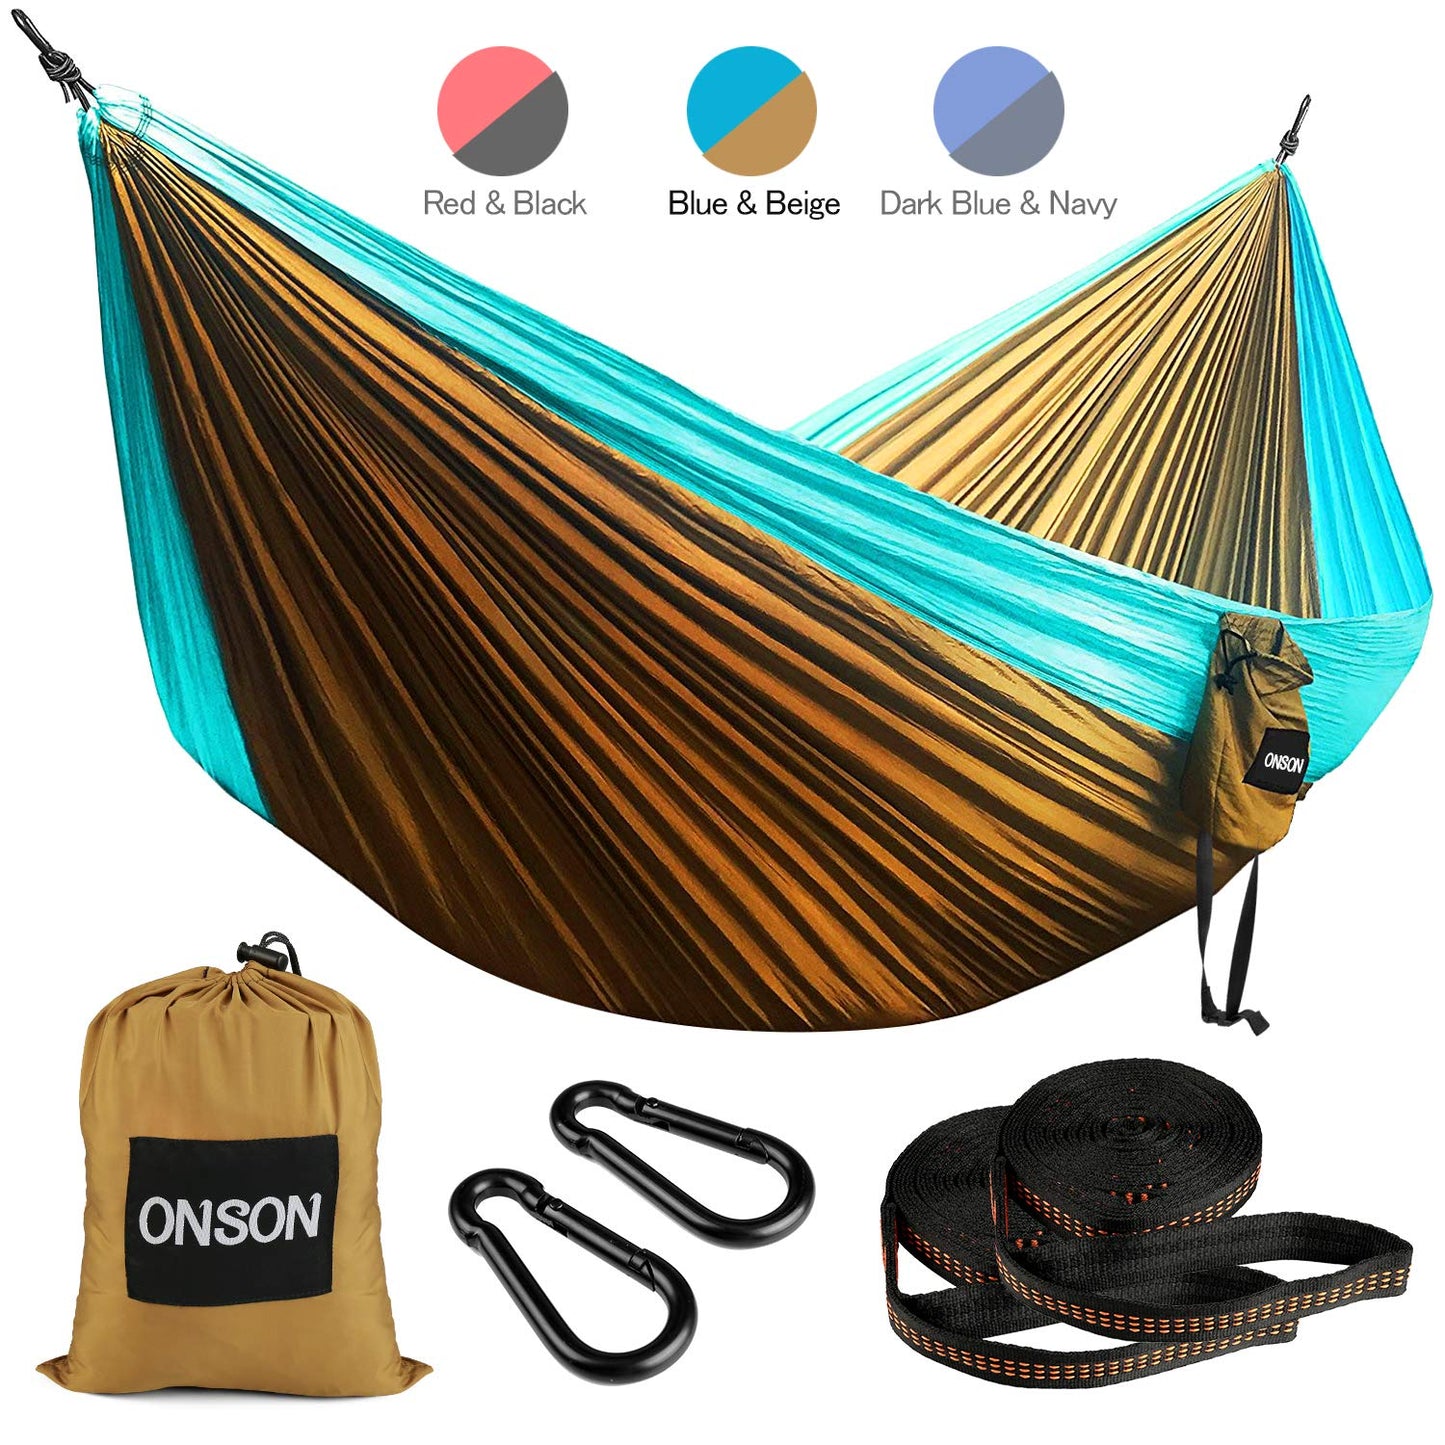 Parachute Double Camping Hammock for Outdoor Activities - ONSON